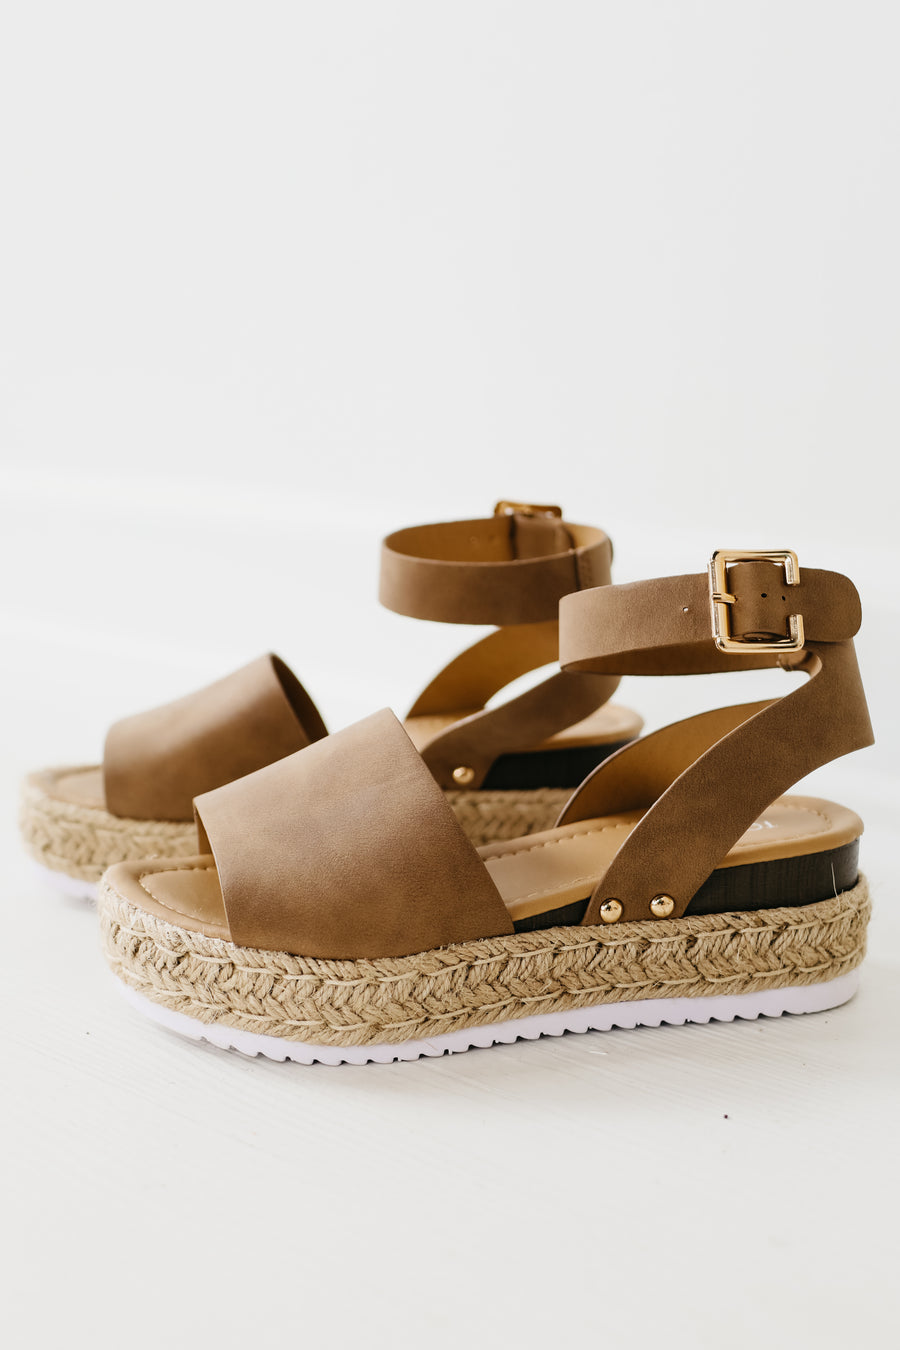 The Candide Espadrille Wedge Sandal  - FINAL SALE